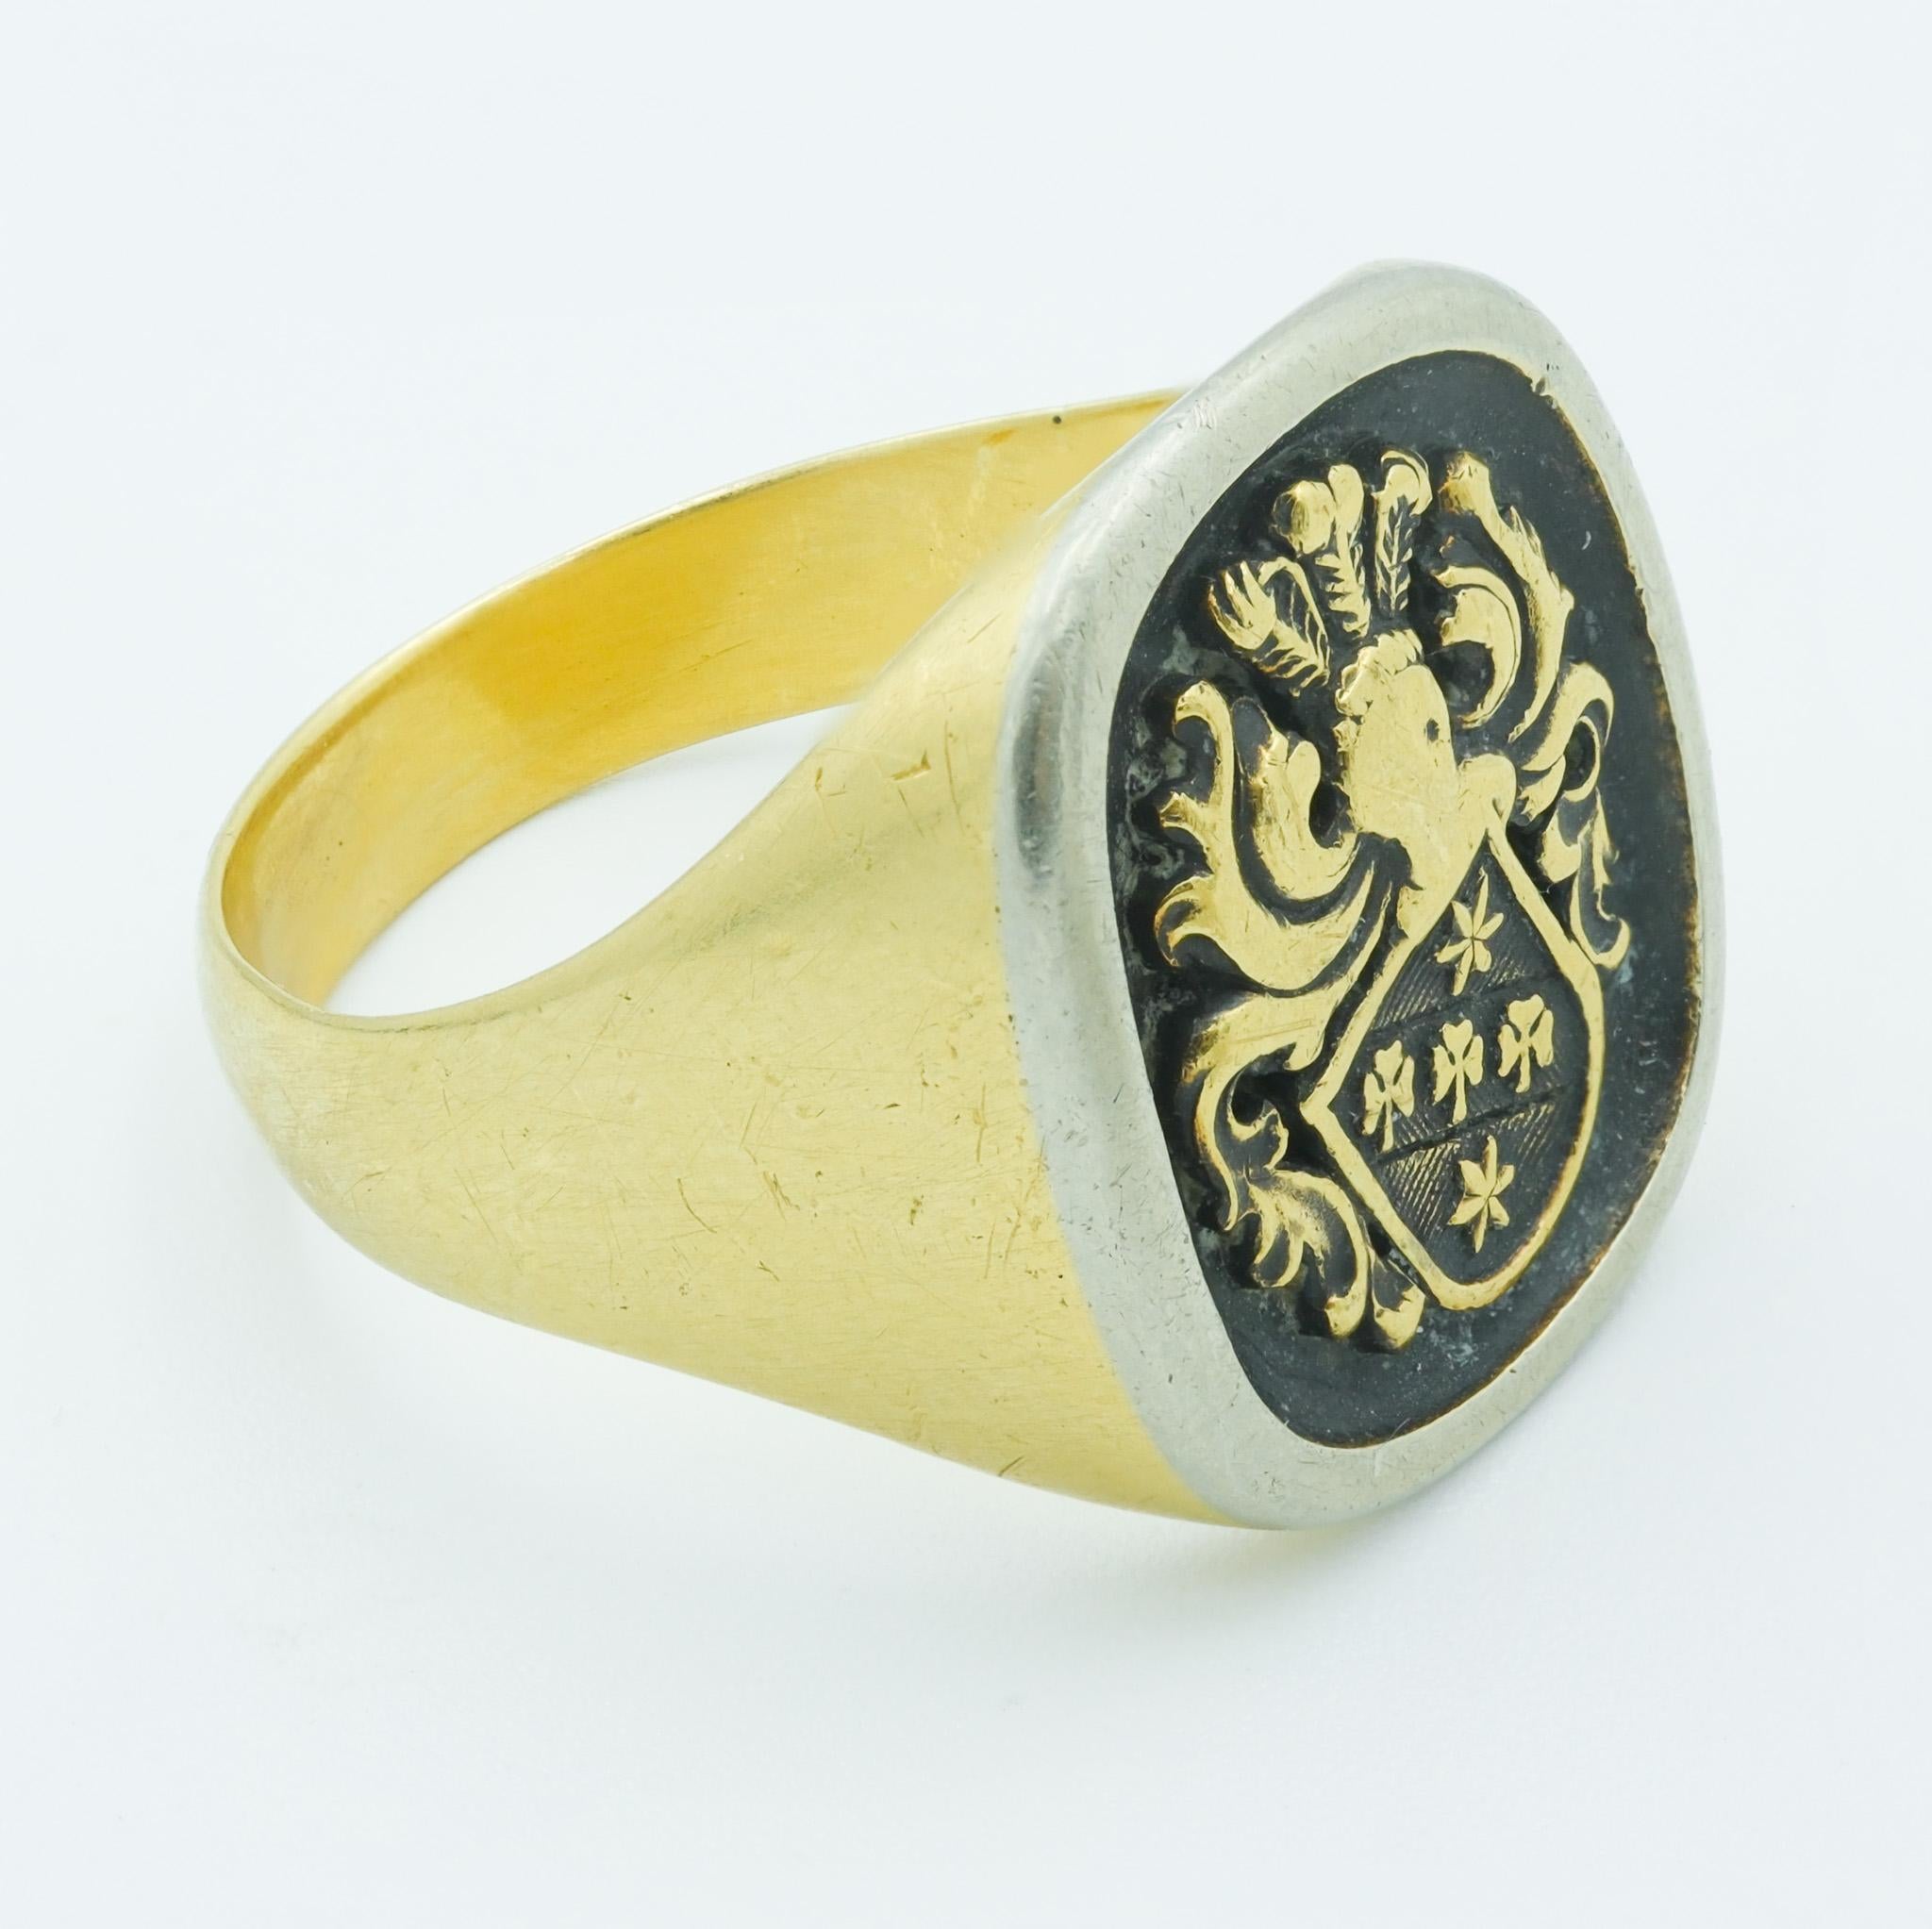  Vintage 18 Karat Yellow and Silver Accent Family House Crest Signet Ring en vente 1